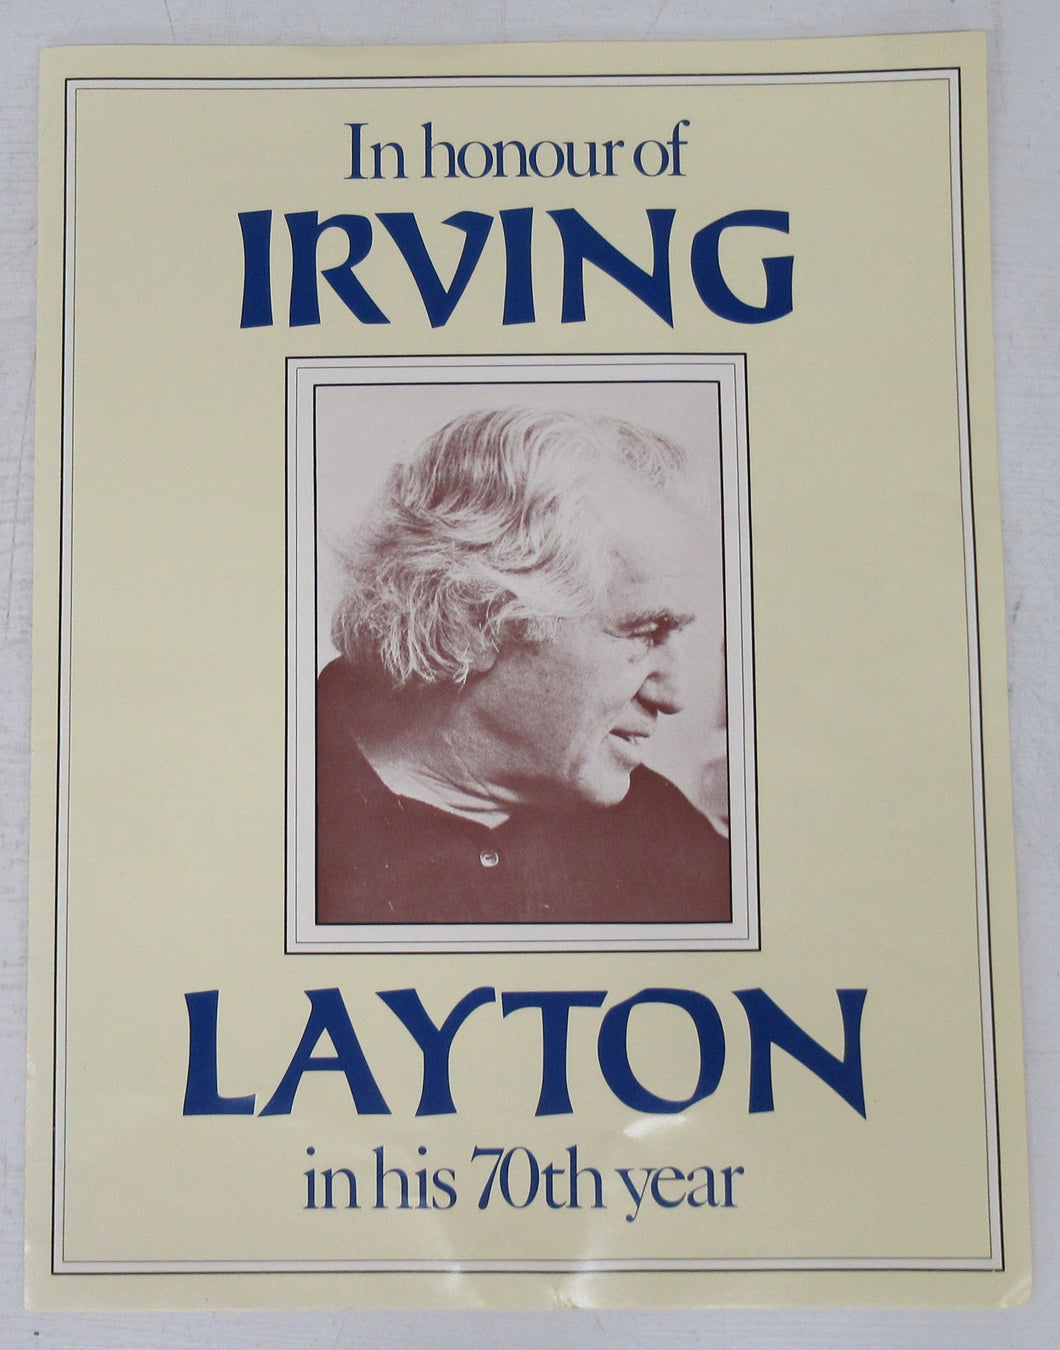 In honour of Irving Layton in his 70th year (Promotional material for Poems For Jacket the Ripper)